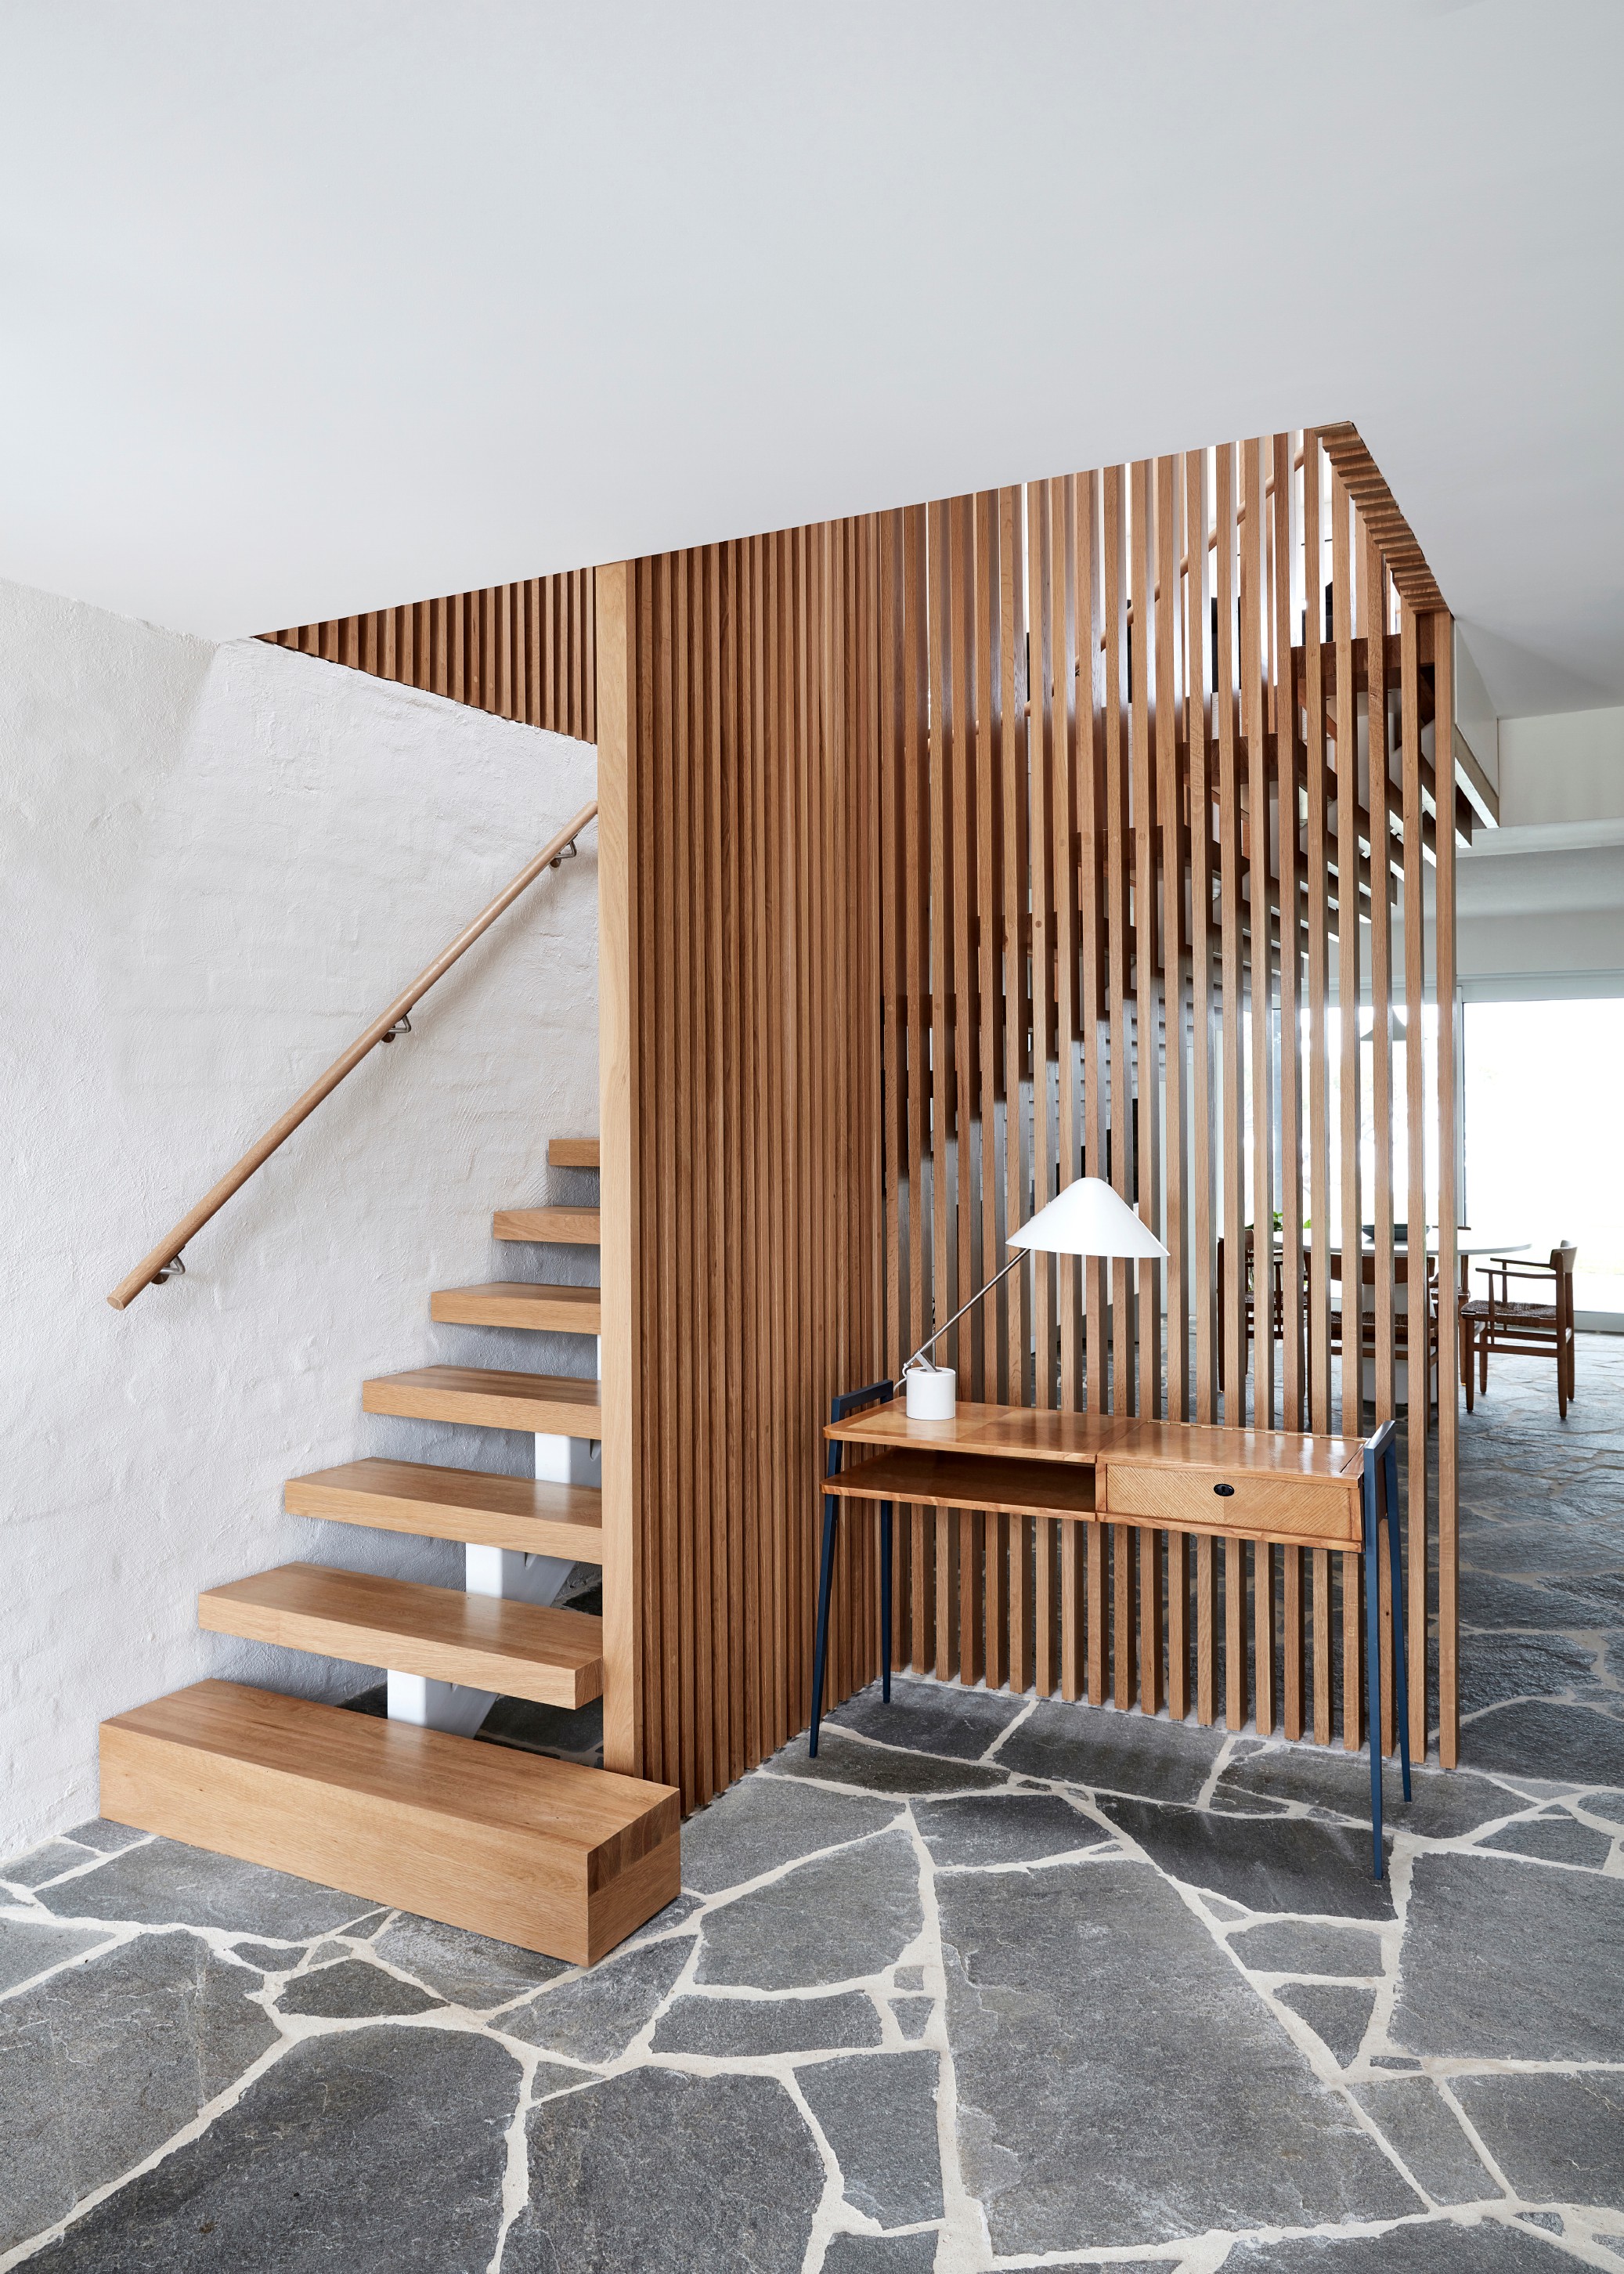 Home Interior Dreams: Modern homes stairs designs, wooden stairs railing  ideas.